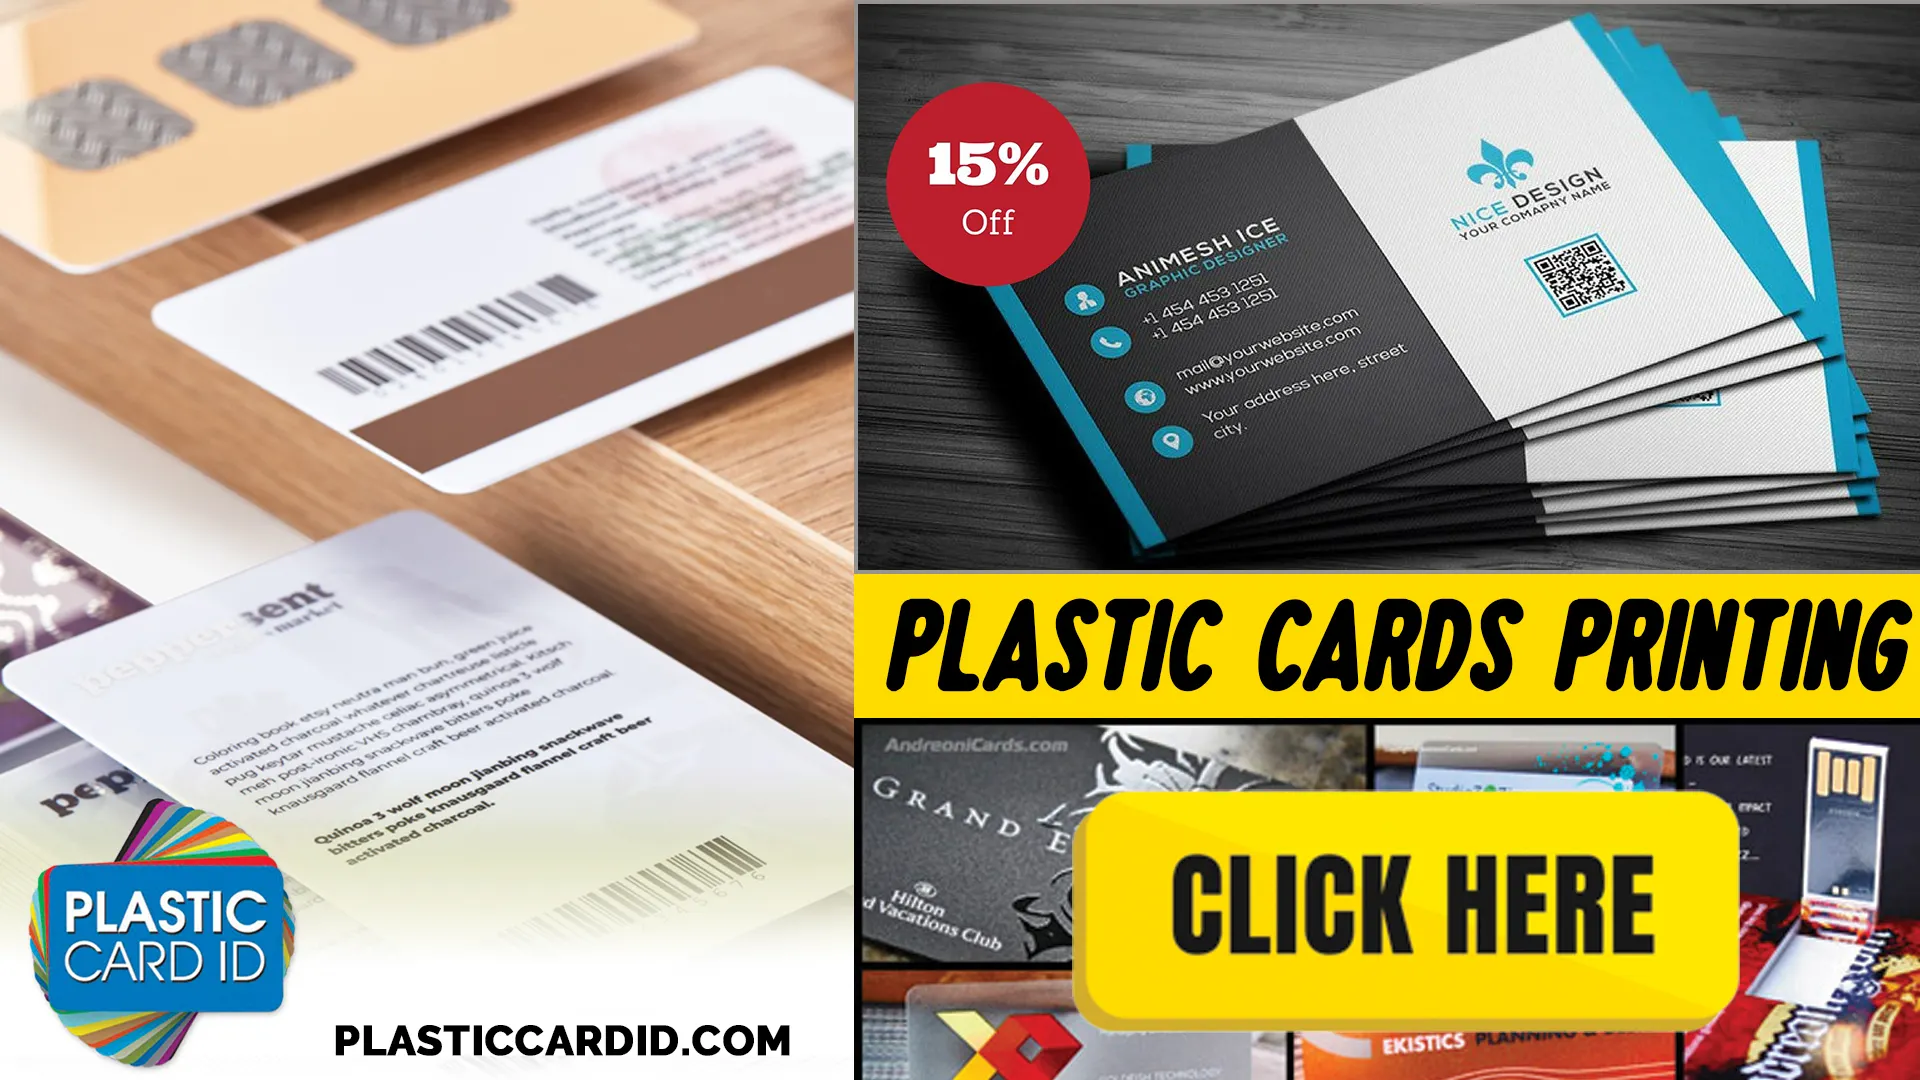 Advancing Sustainability with Every Upcycled Card